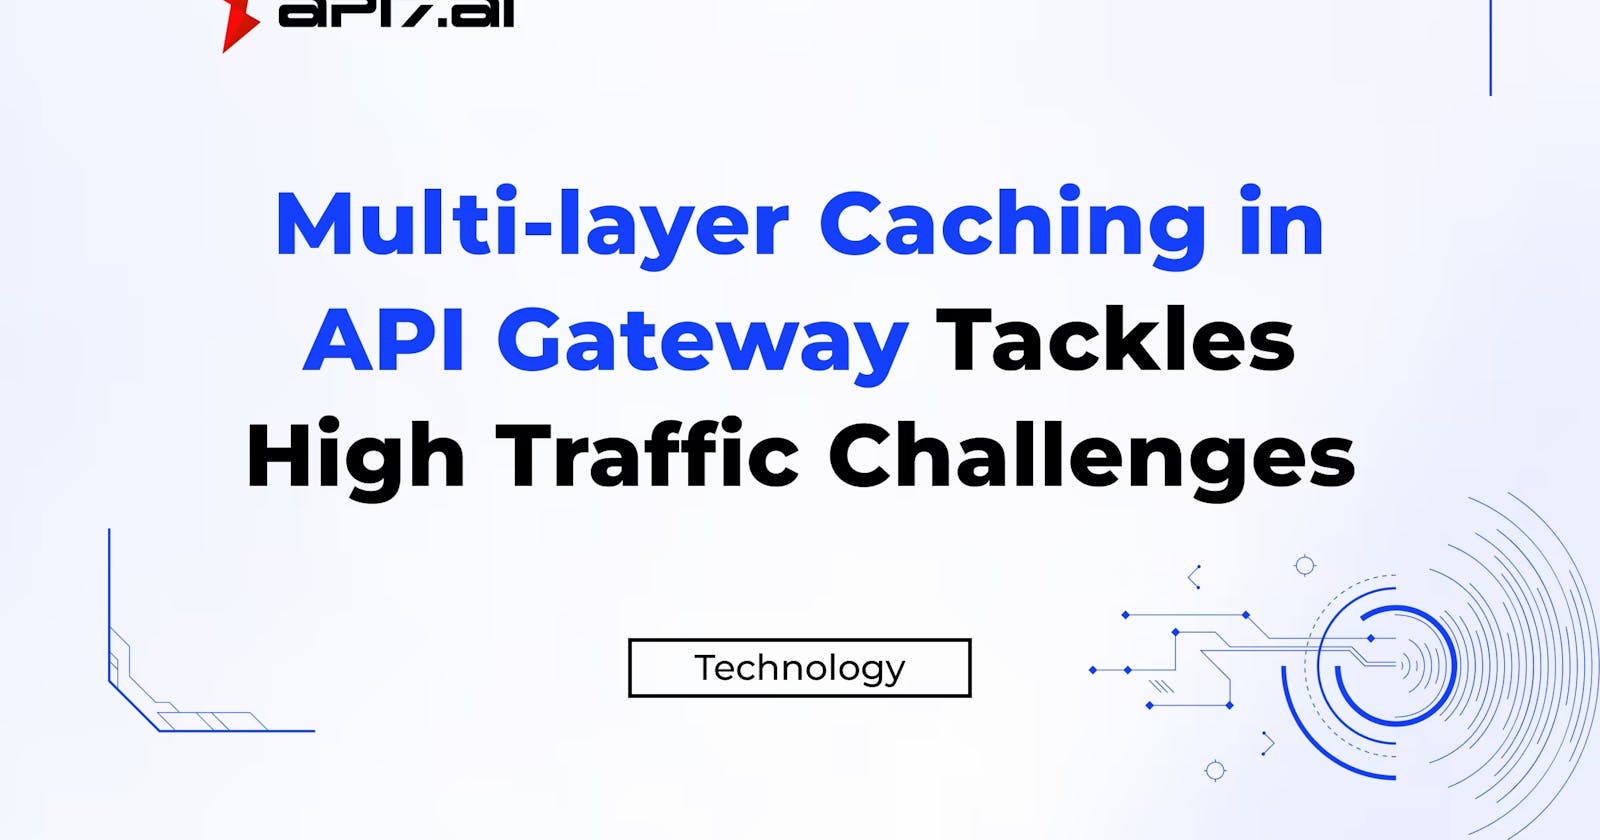 Multi-layer Caching in API Gateway Tackles High Traffic Challenges